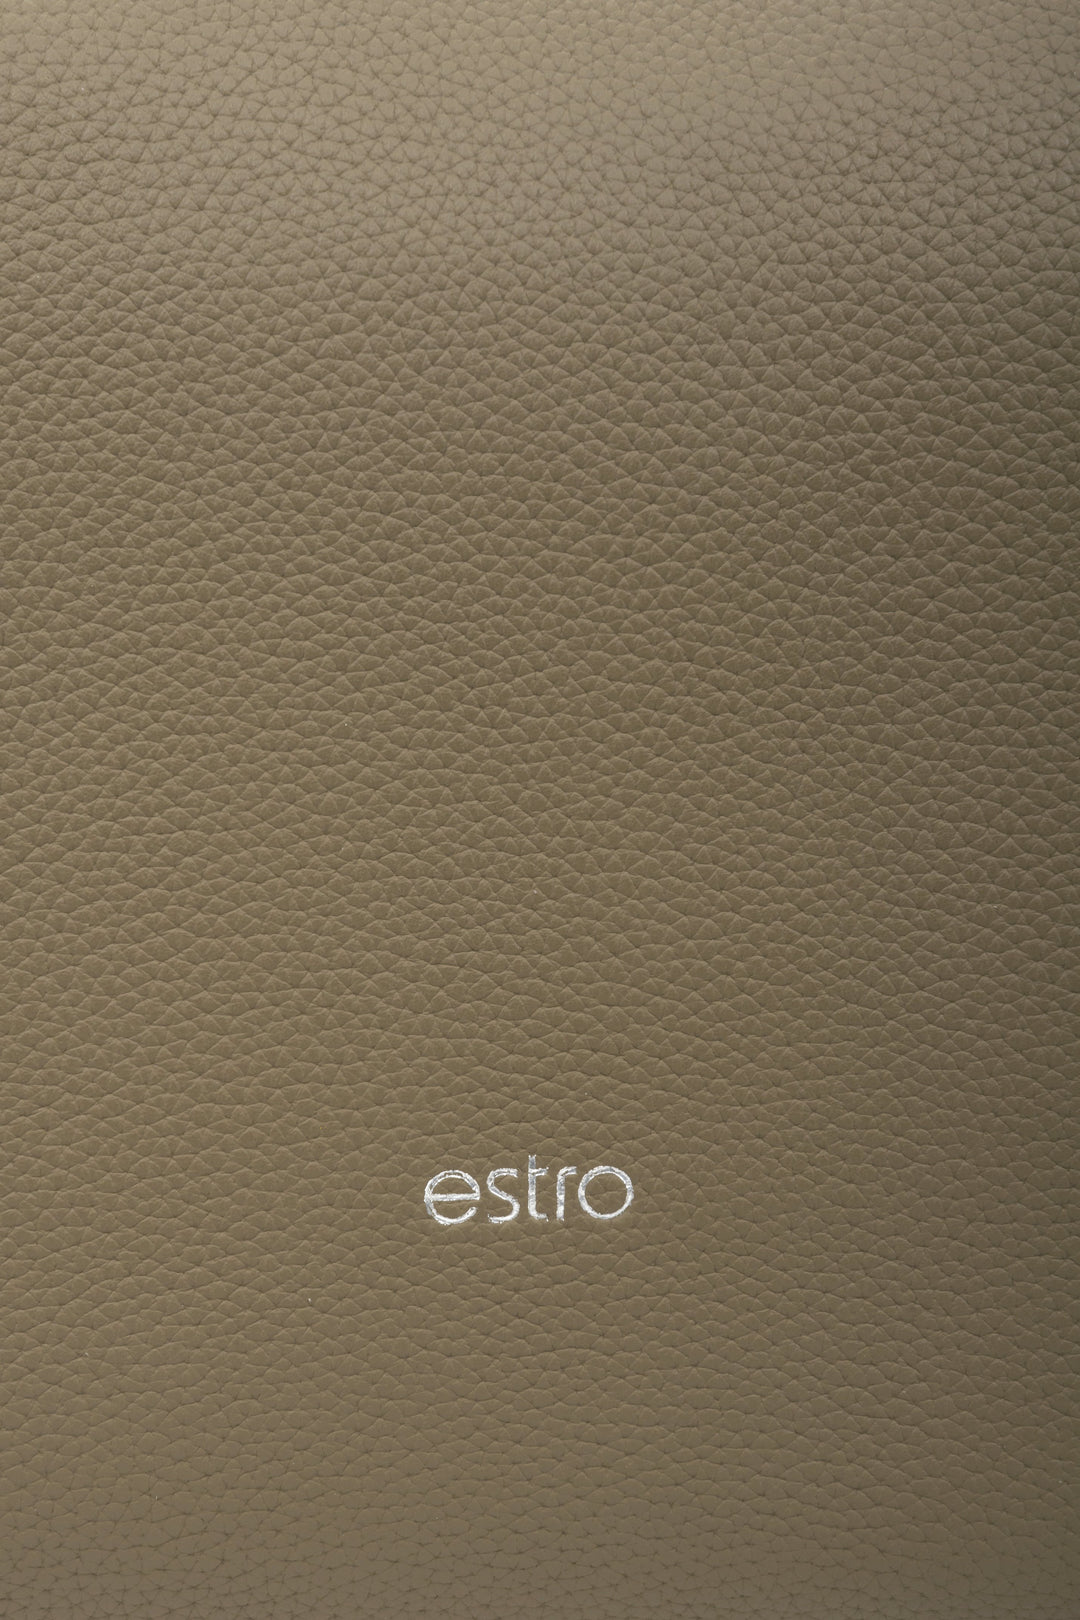 Women's brownish-grey Estro crescent-shaped handbag made of genuine leather - close-up on the details.